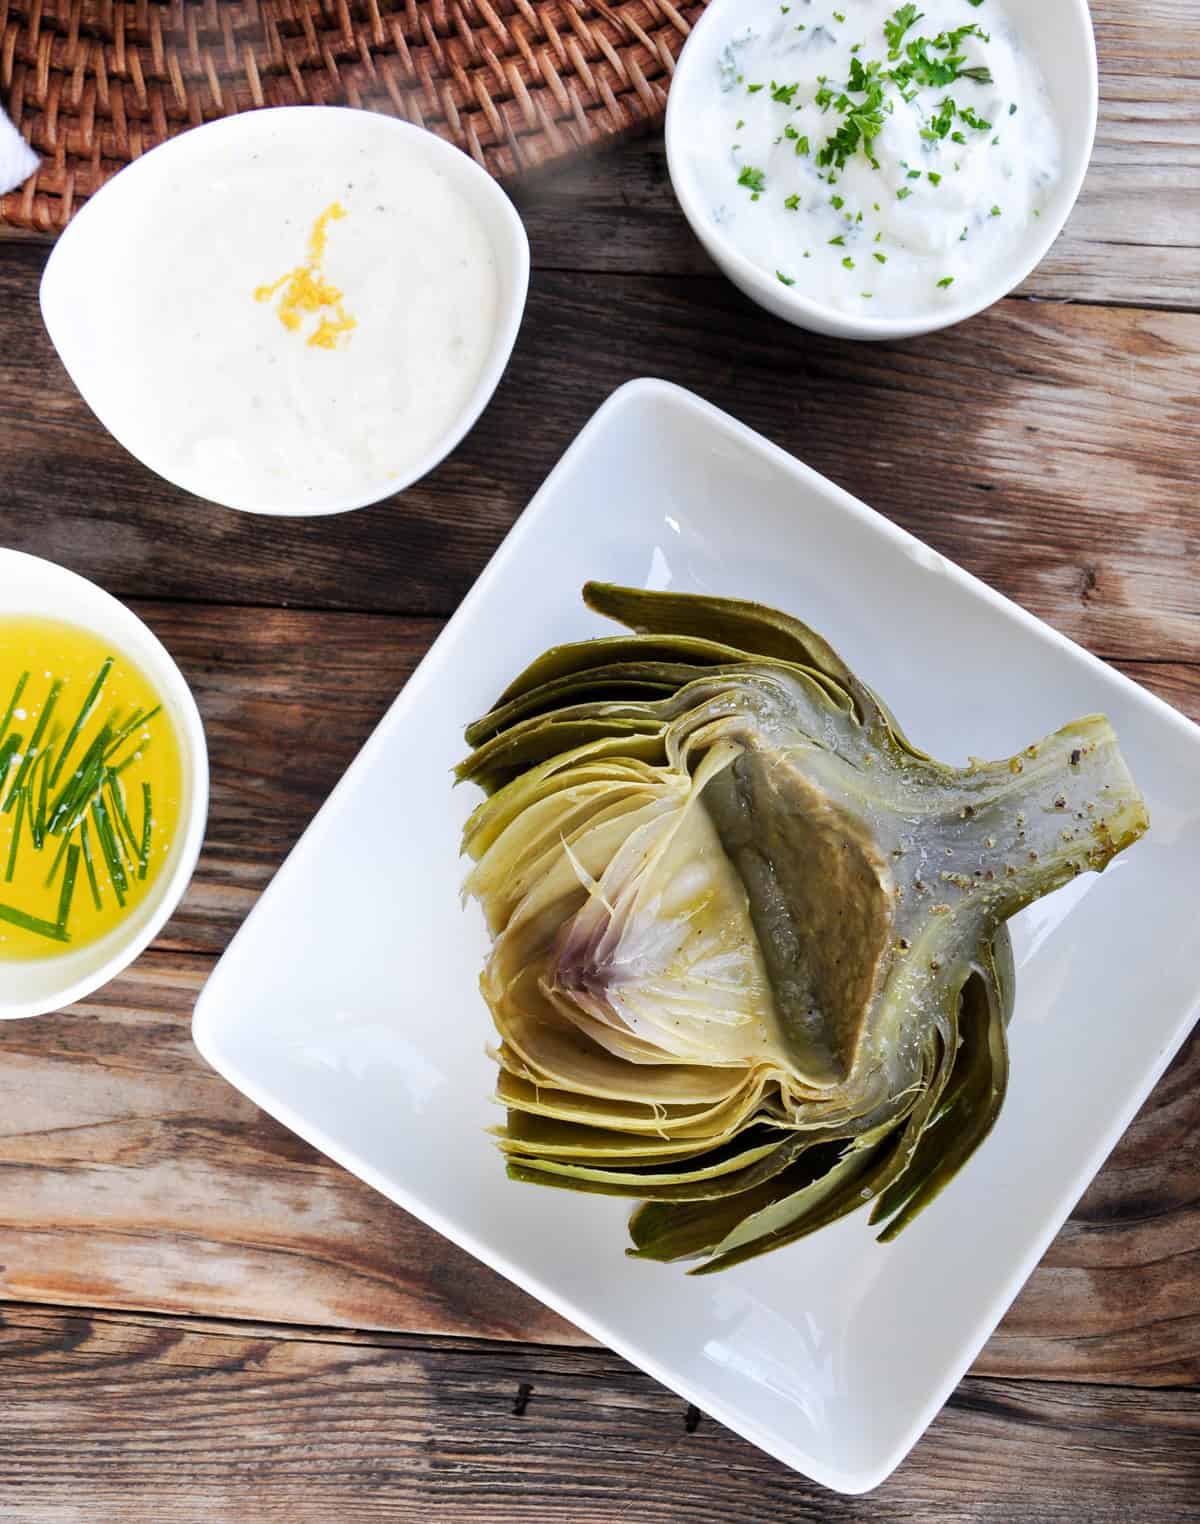 Fool-Proof Artichoke with Three Dipping Sauces